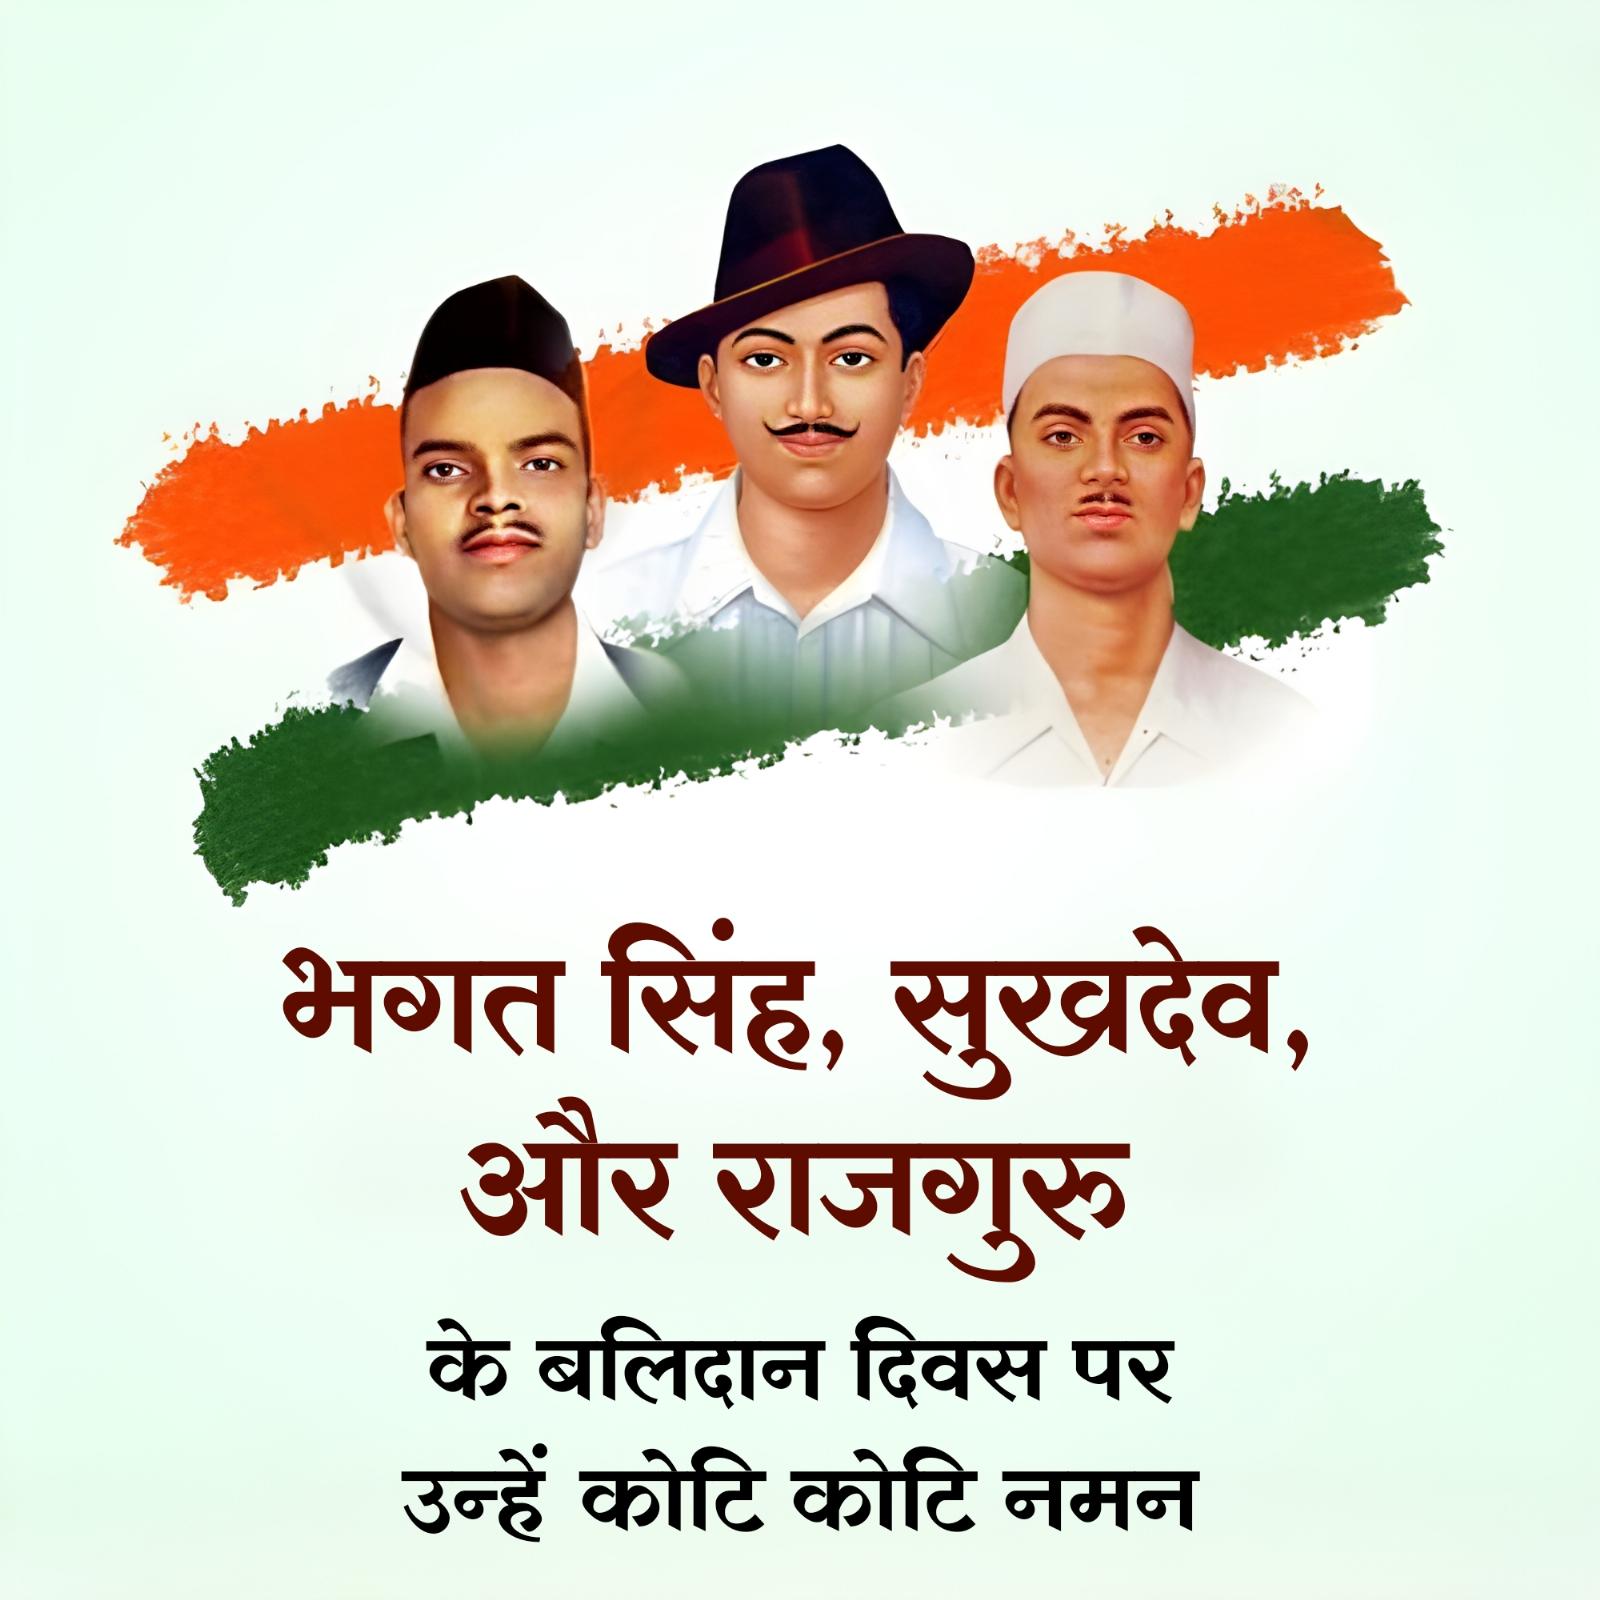 23 March Shaheed Diwas Images